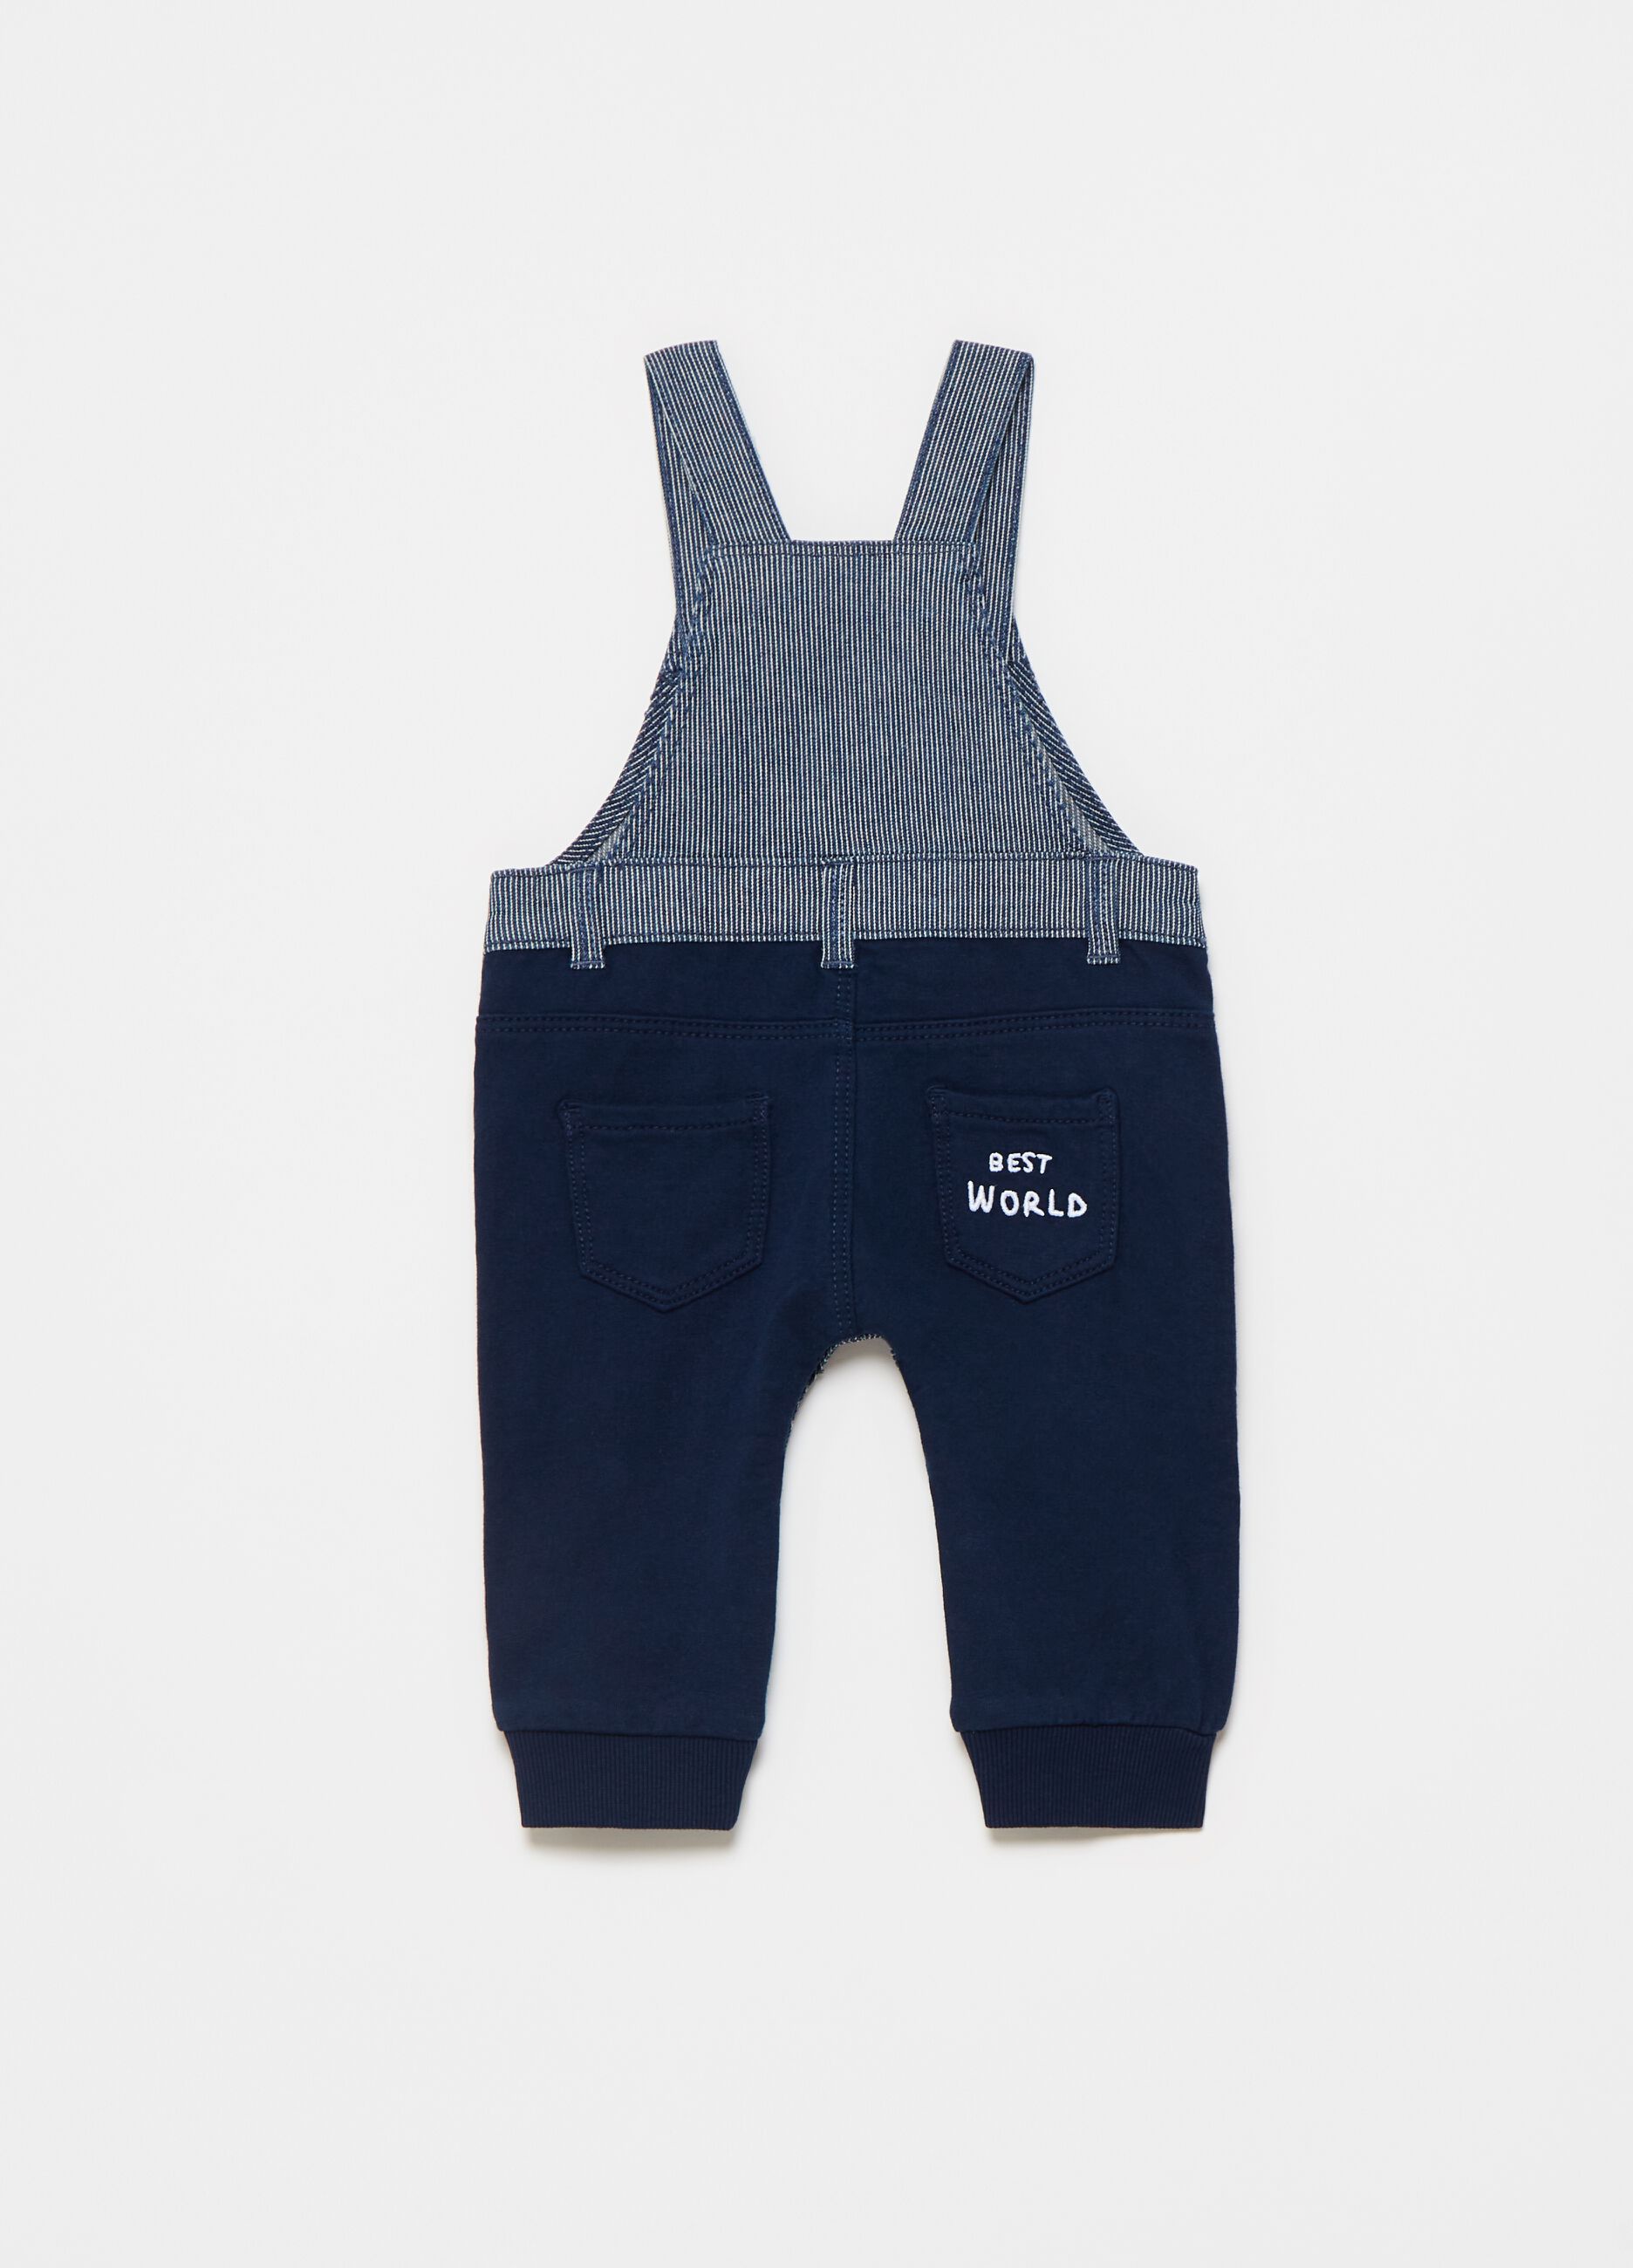 Dungarees in 100% cotton with striped insert